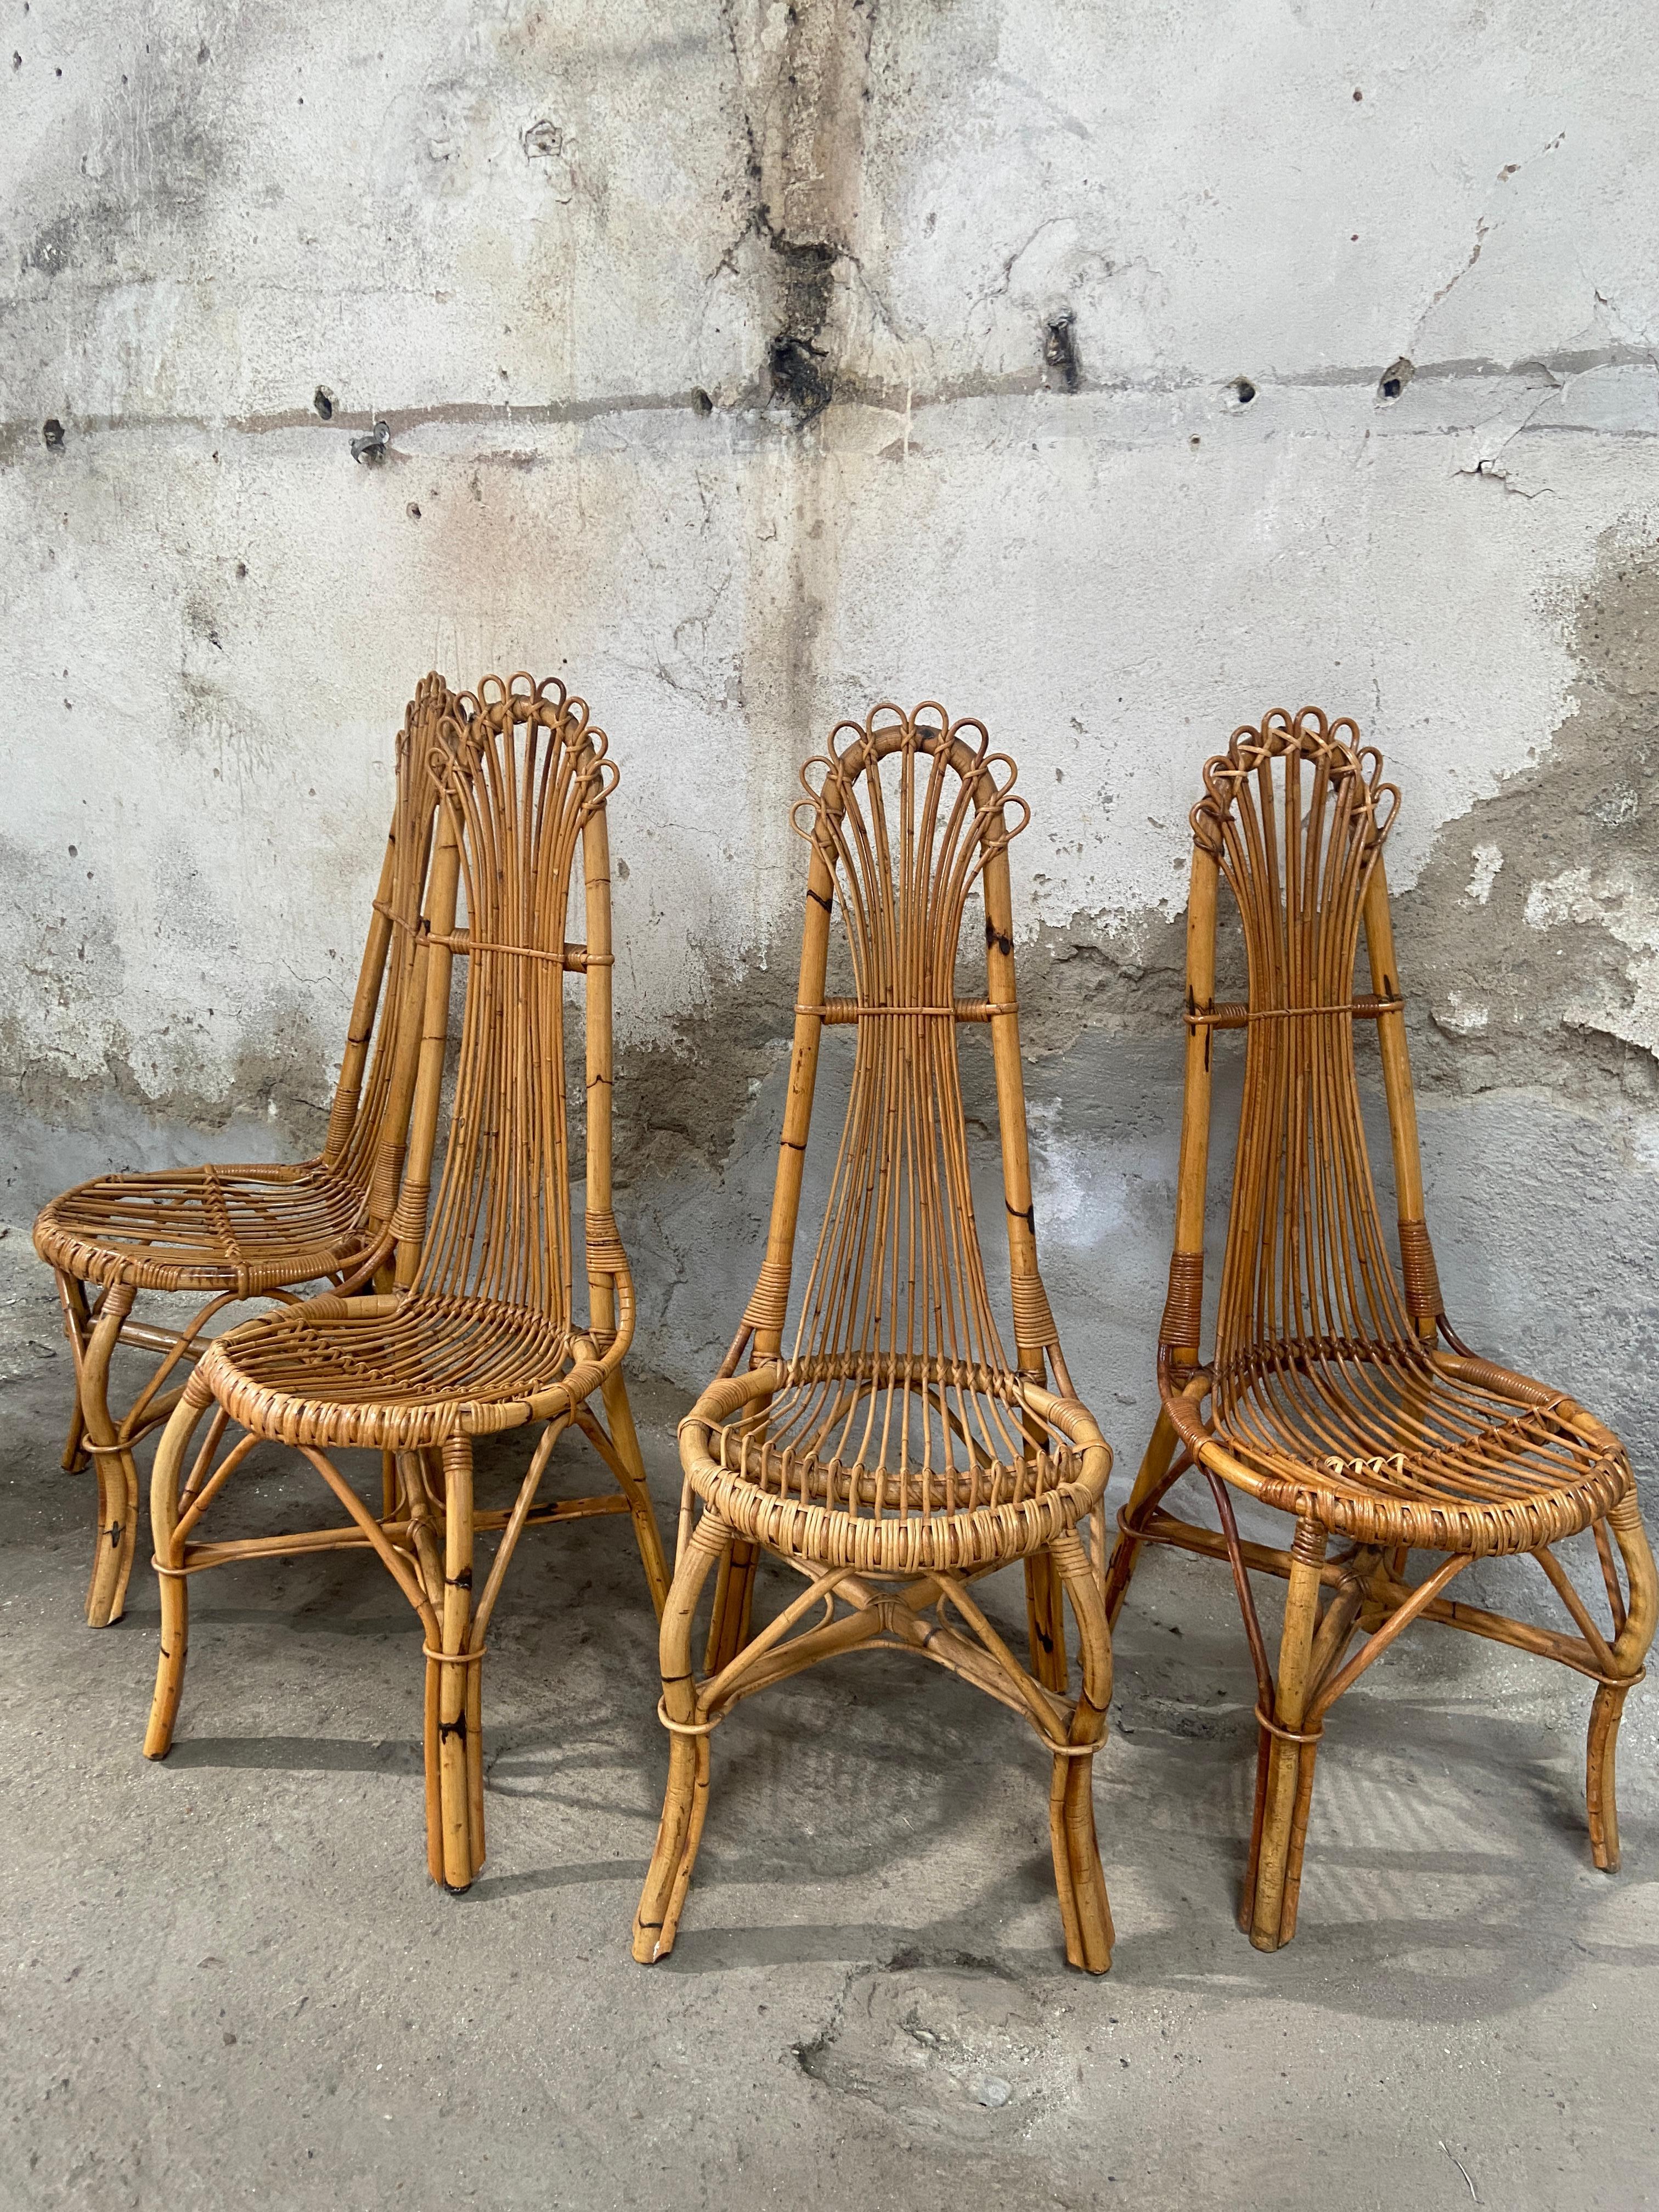 Late 20th Century Mid-Century Modern Set of 4 Bamboo Chairs from the French Riviera, 1970s For Sale